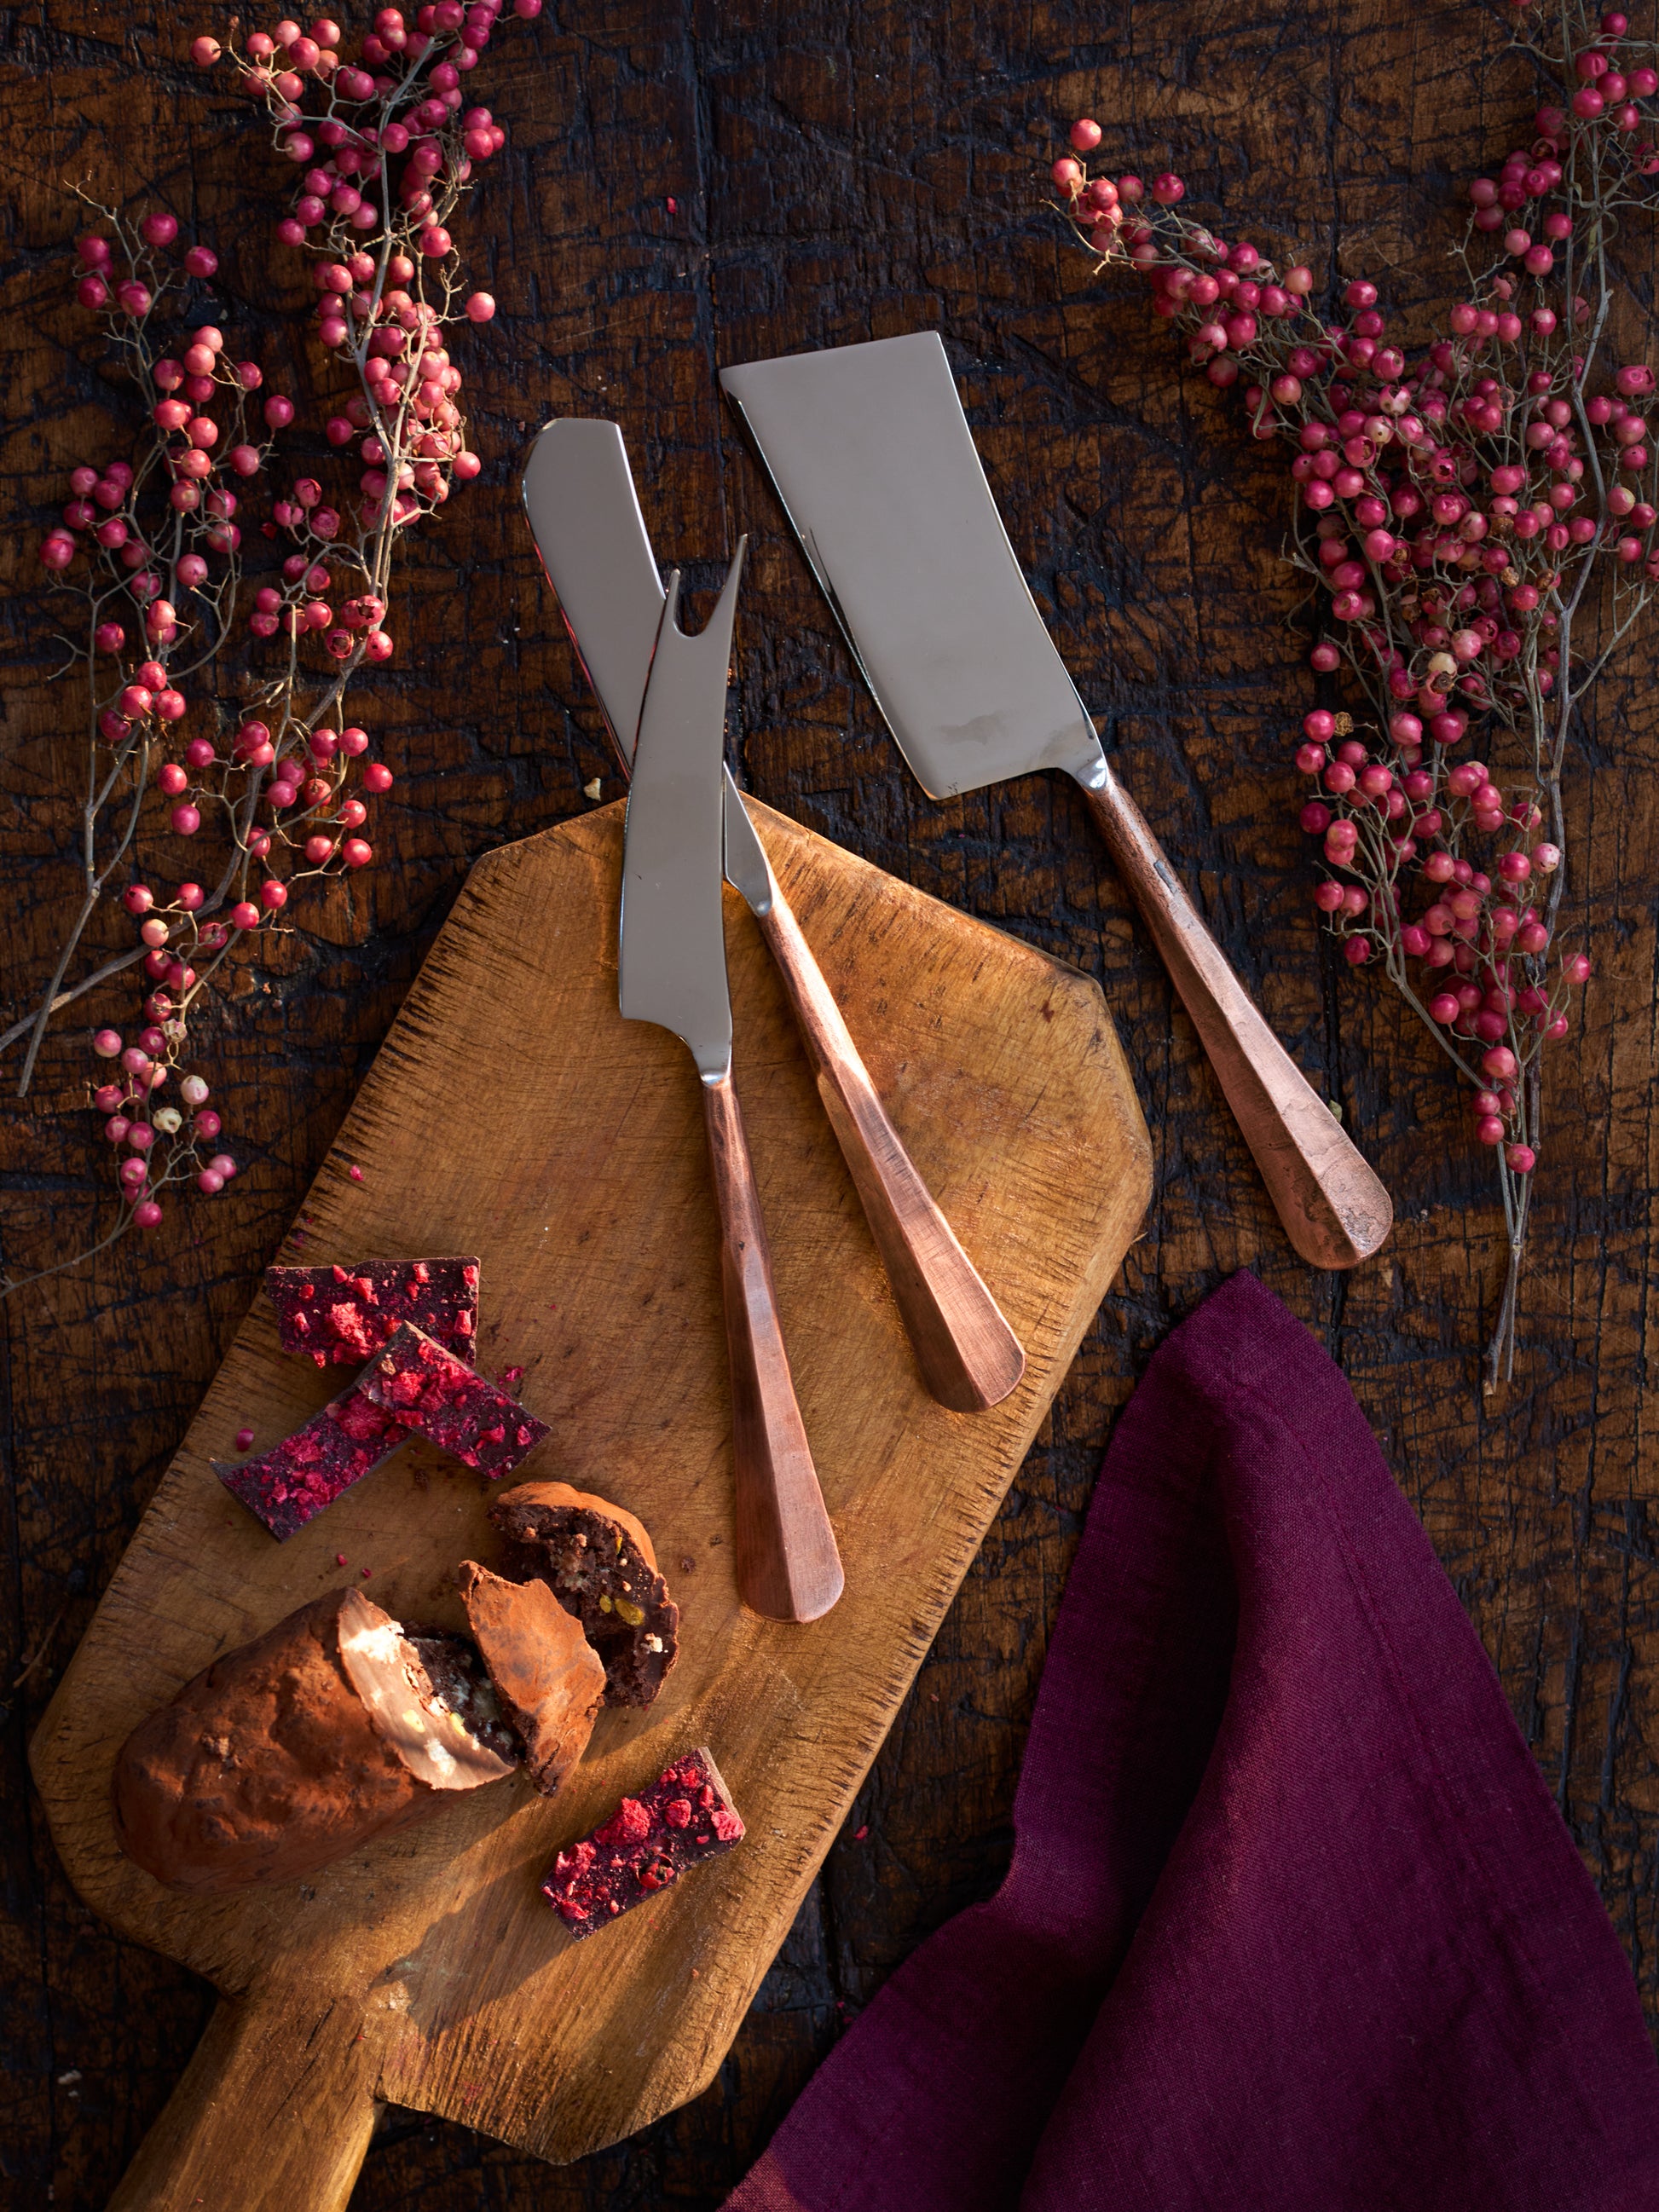 Shop the Simon Pearce Woodbury Copper Cheese Knife Set in Gift Box